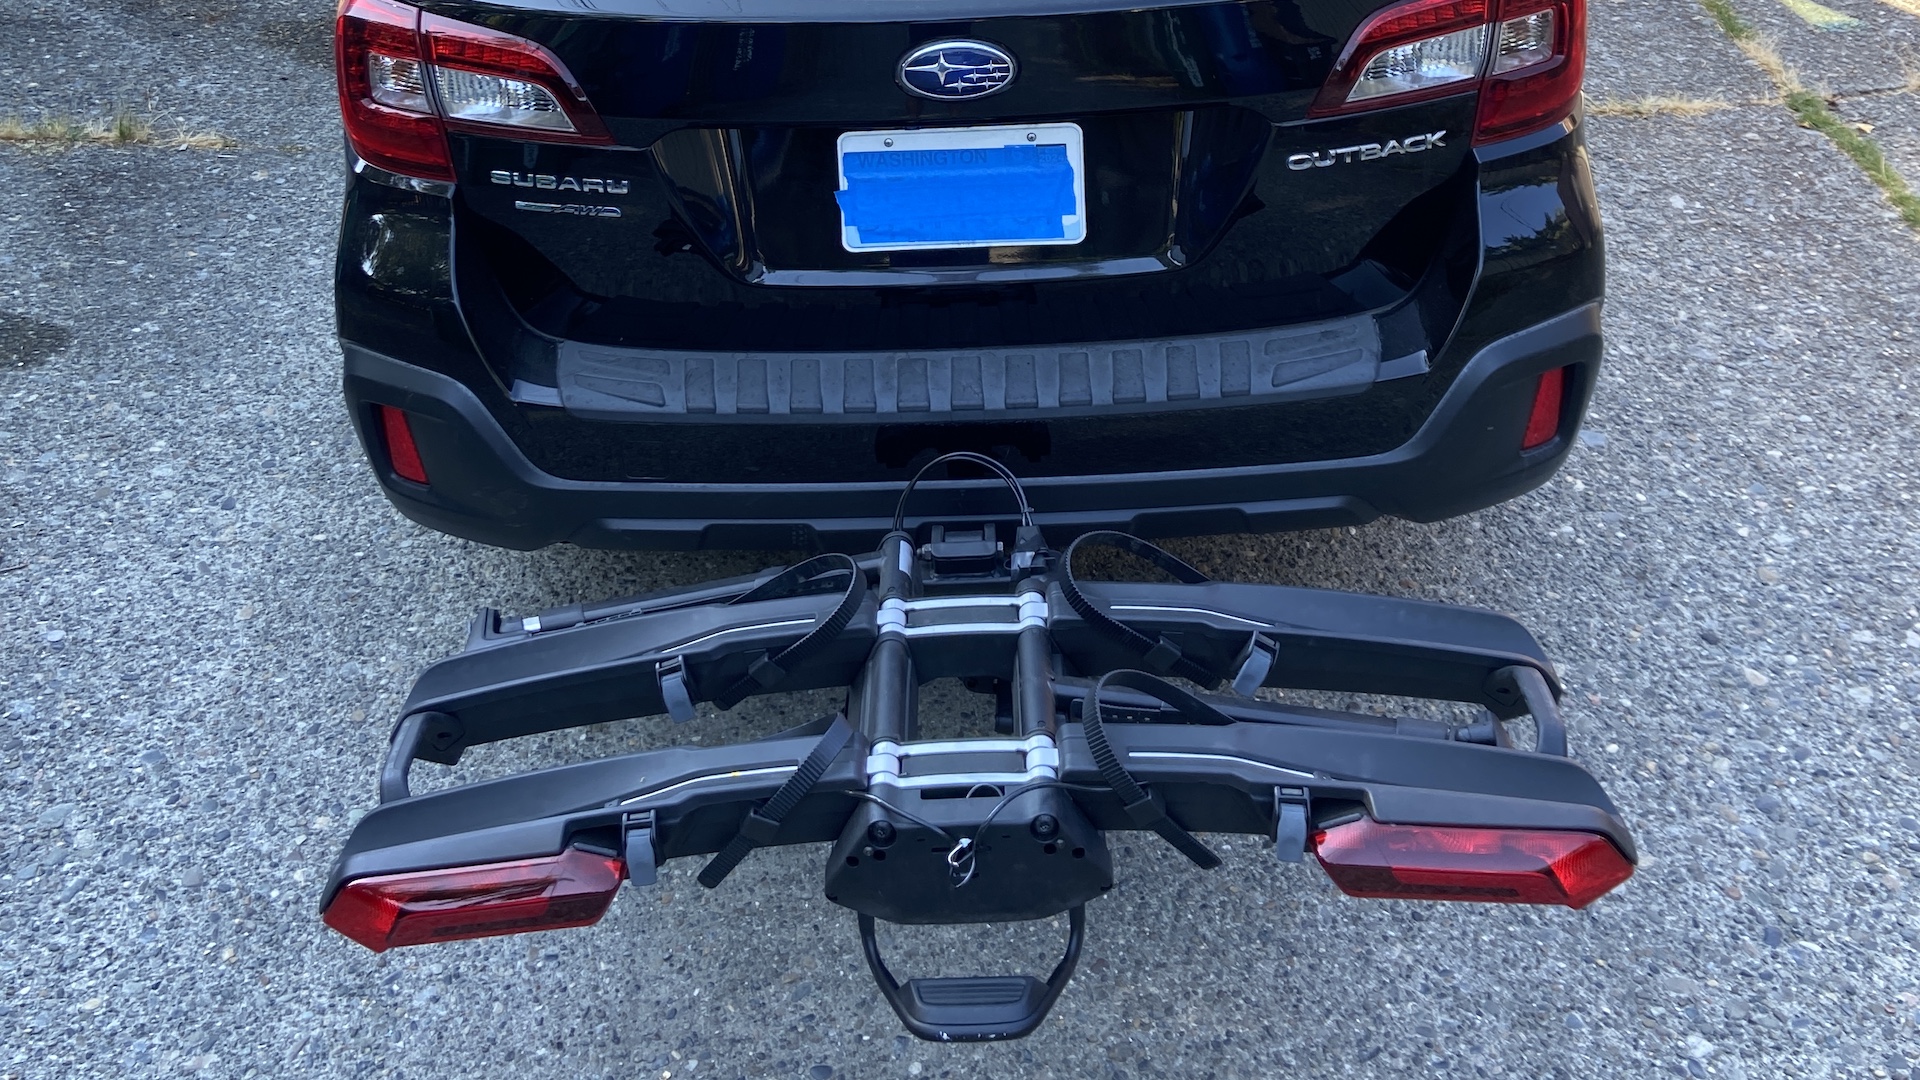 Thule Epos 2 with Lights bike rack review - feature-packed and